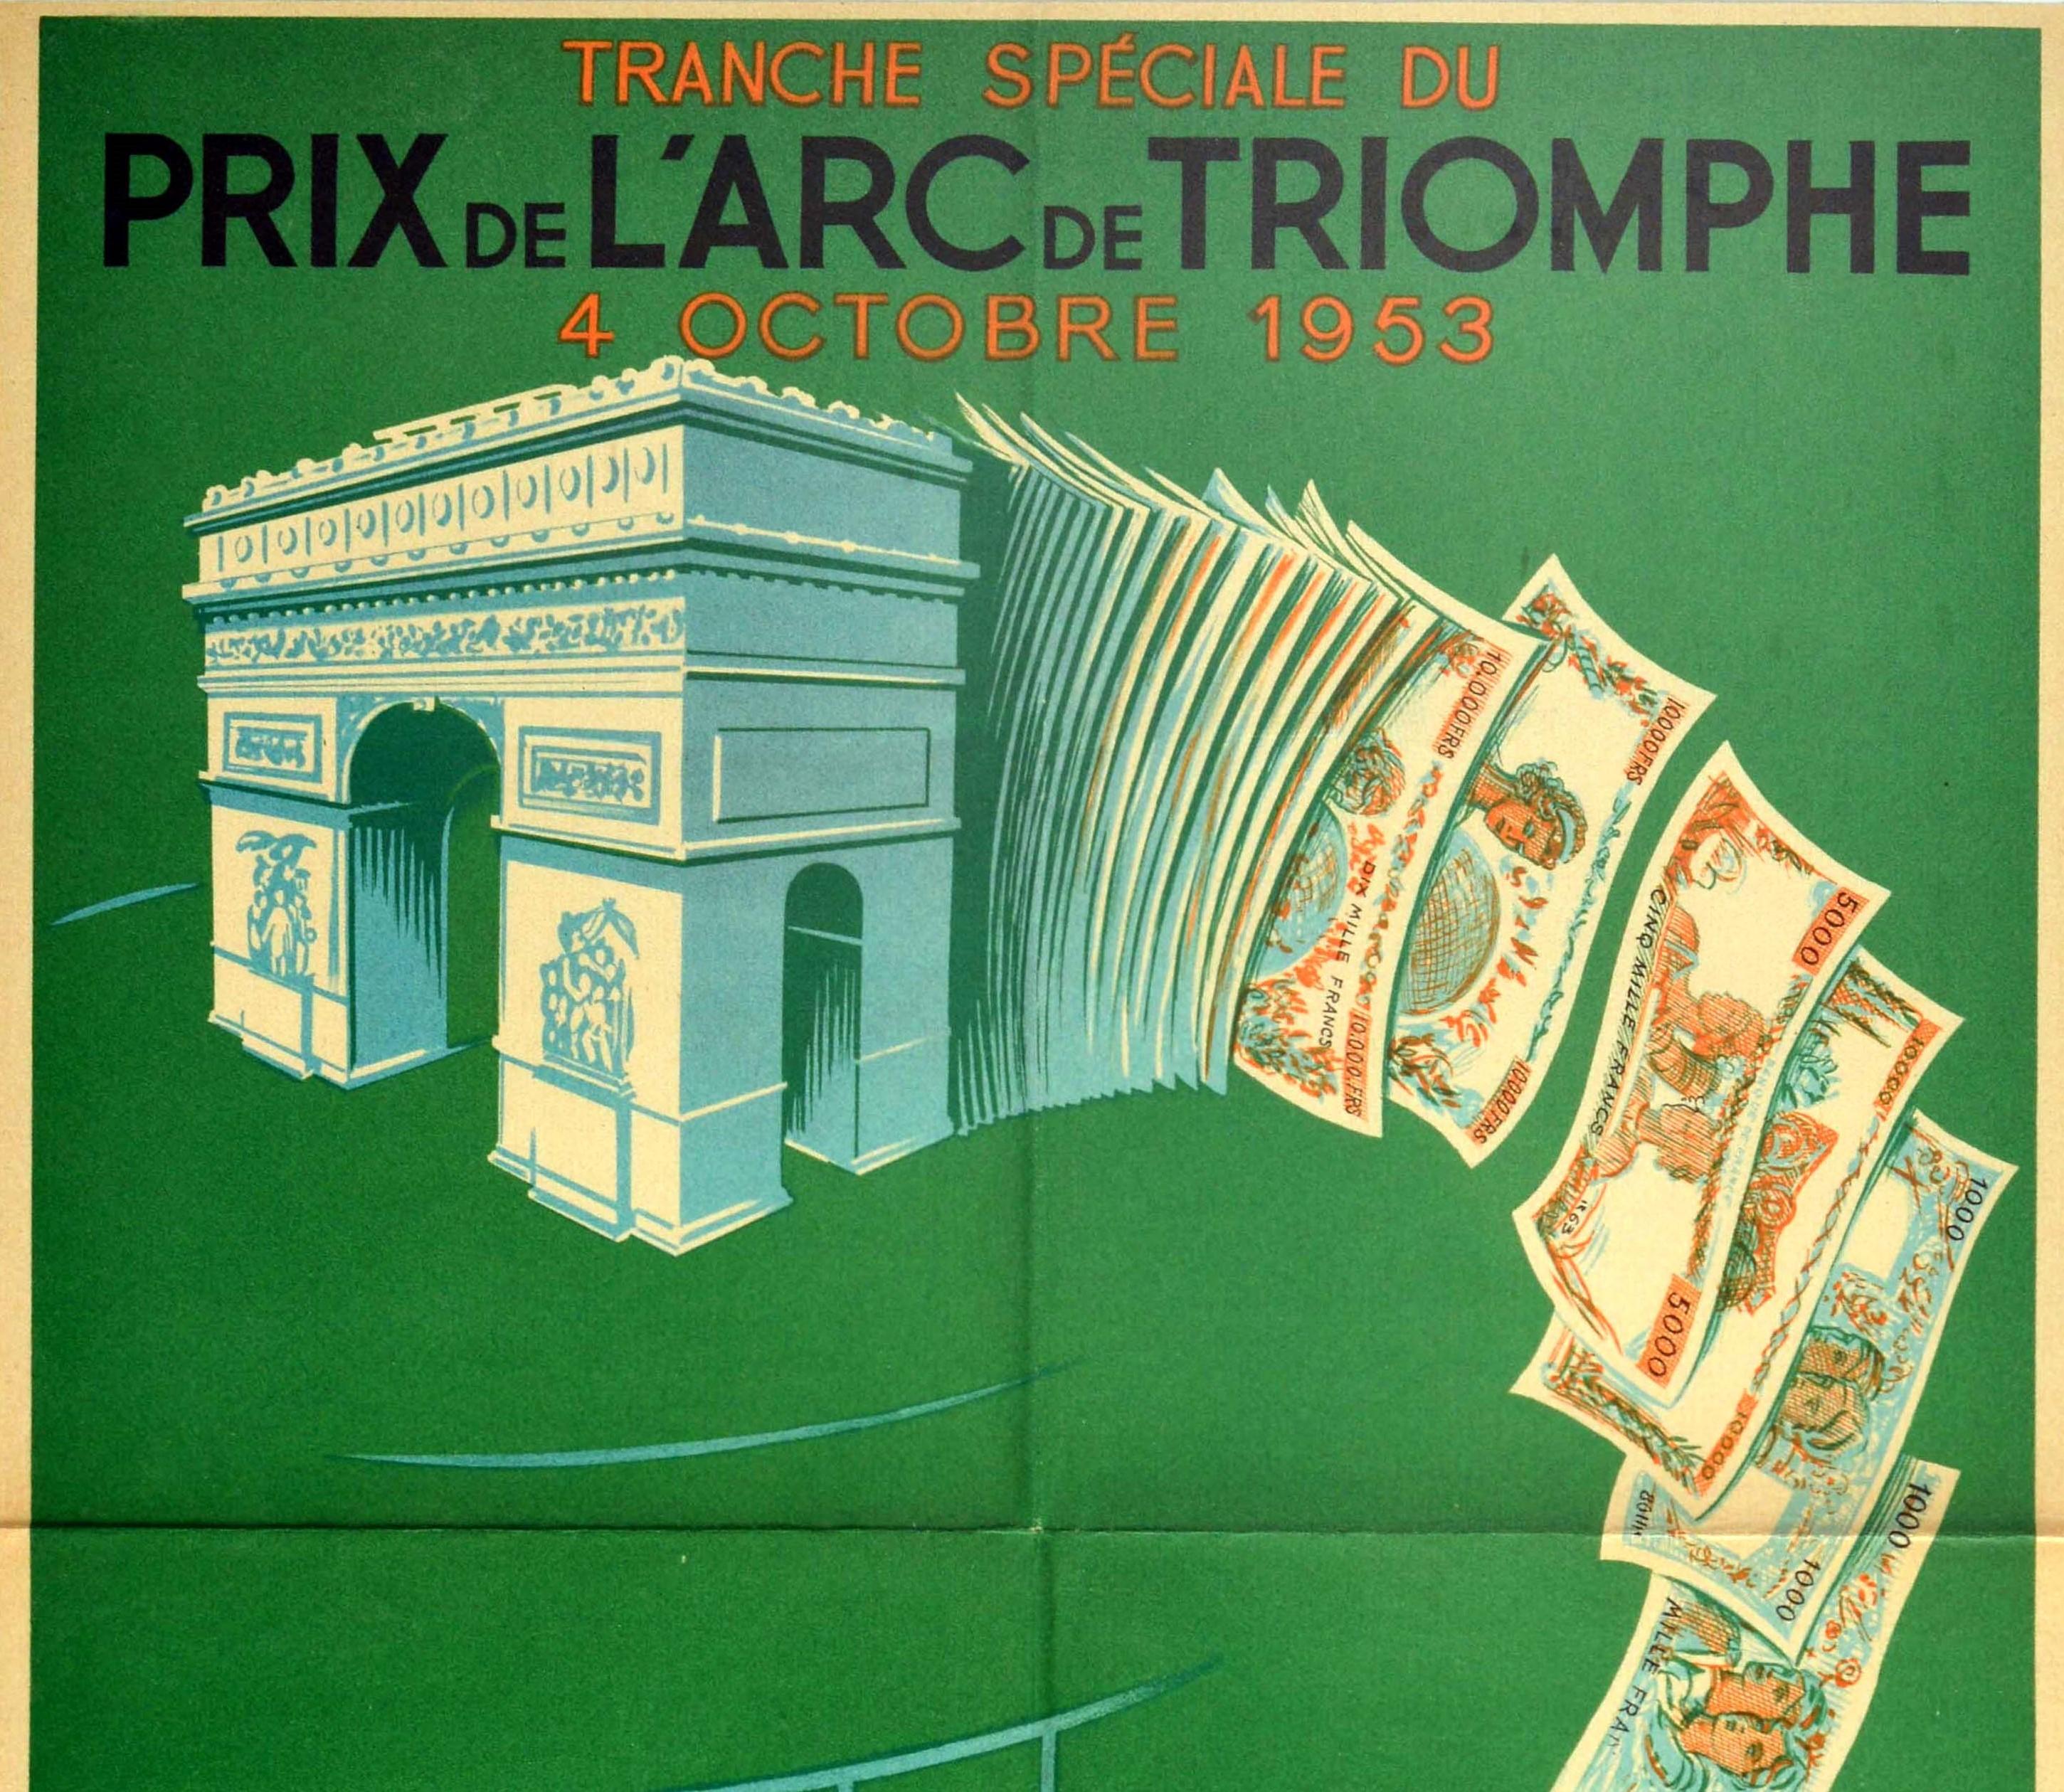 Original vintage National Lottery poster advertising the Loterie Nationale Tranche Speciale du Prix de l'Arc de Triomphe on 4 October 1953 featuring a great design depicting bank notes falling off the back of the historic Arc de Triomphe in Paris,